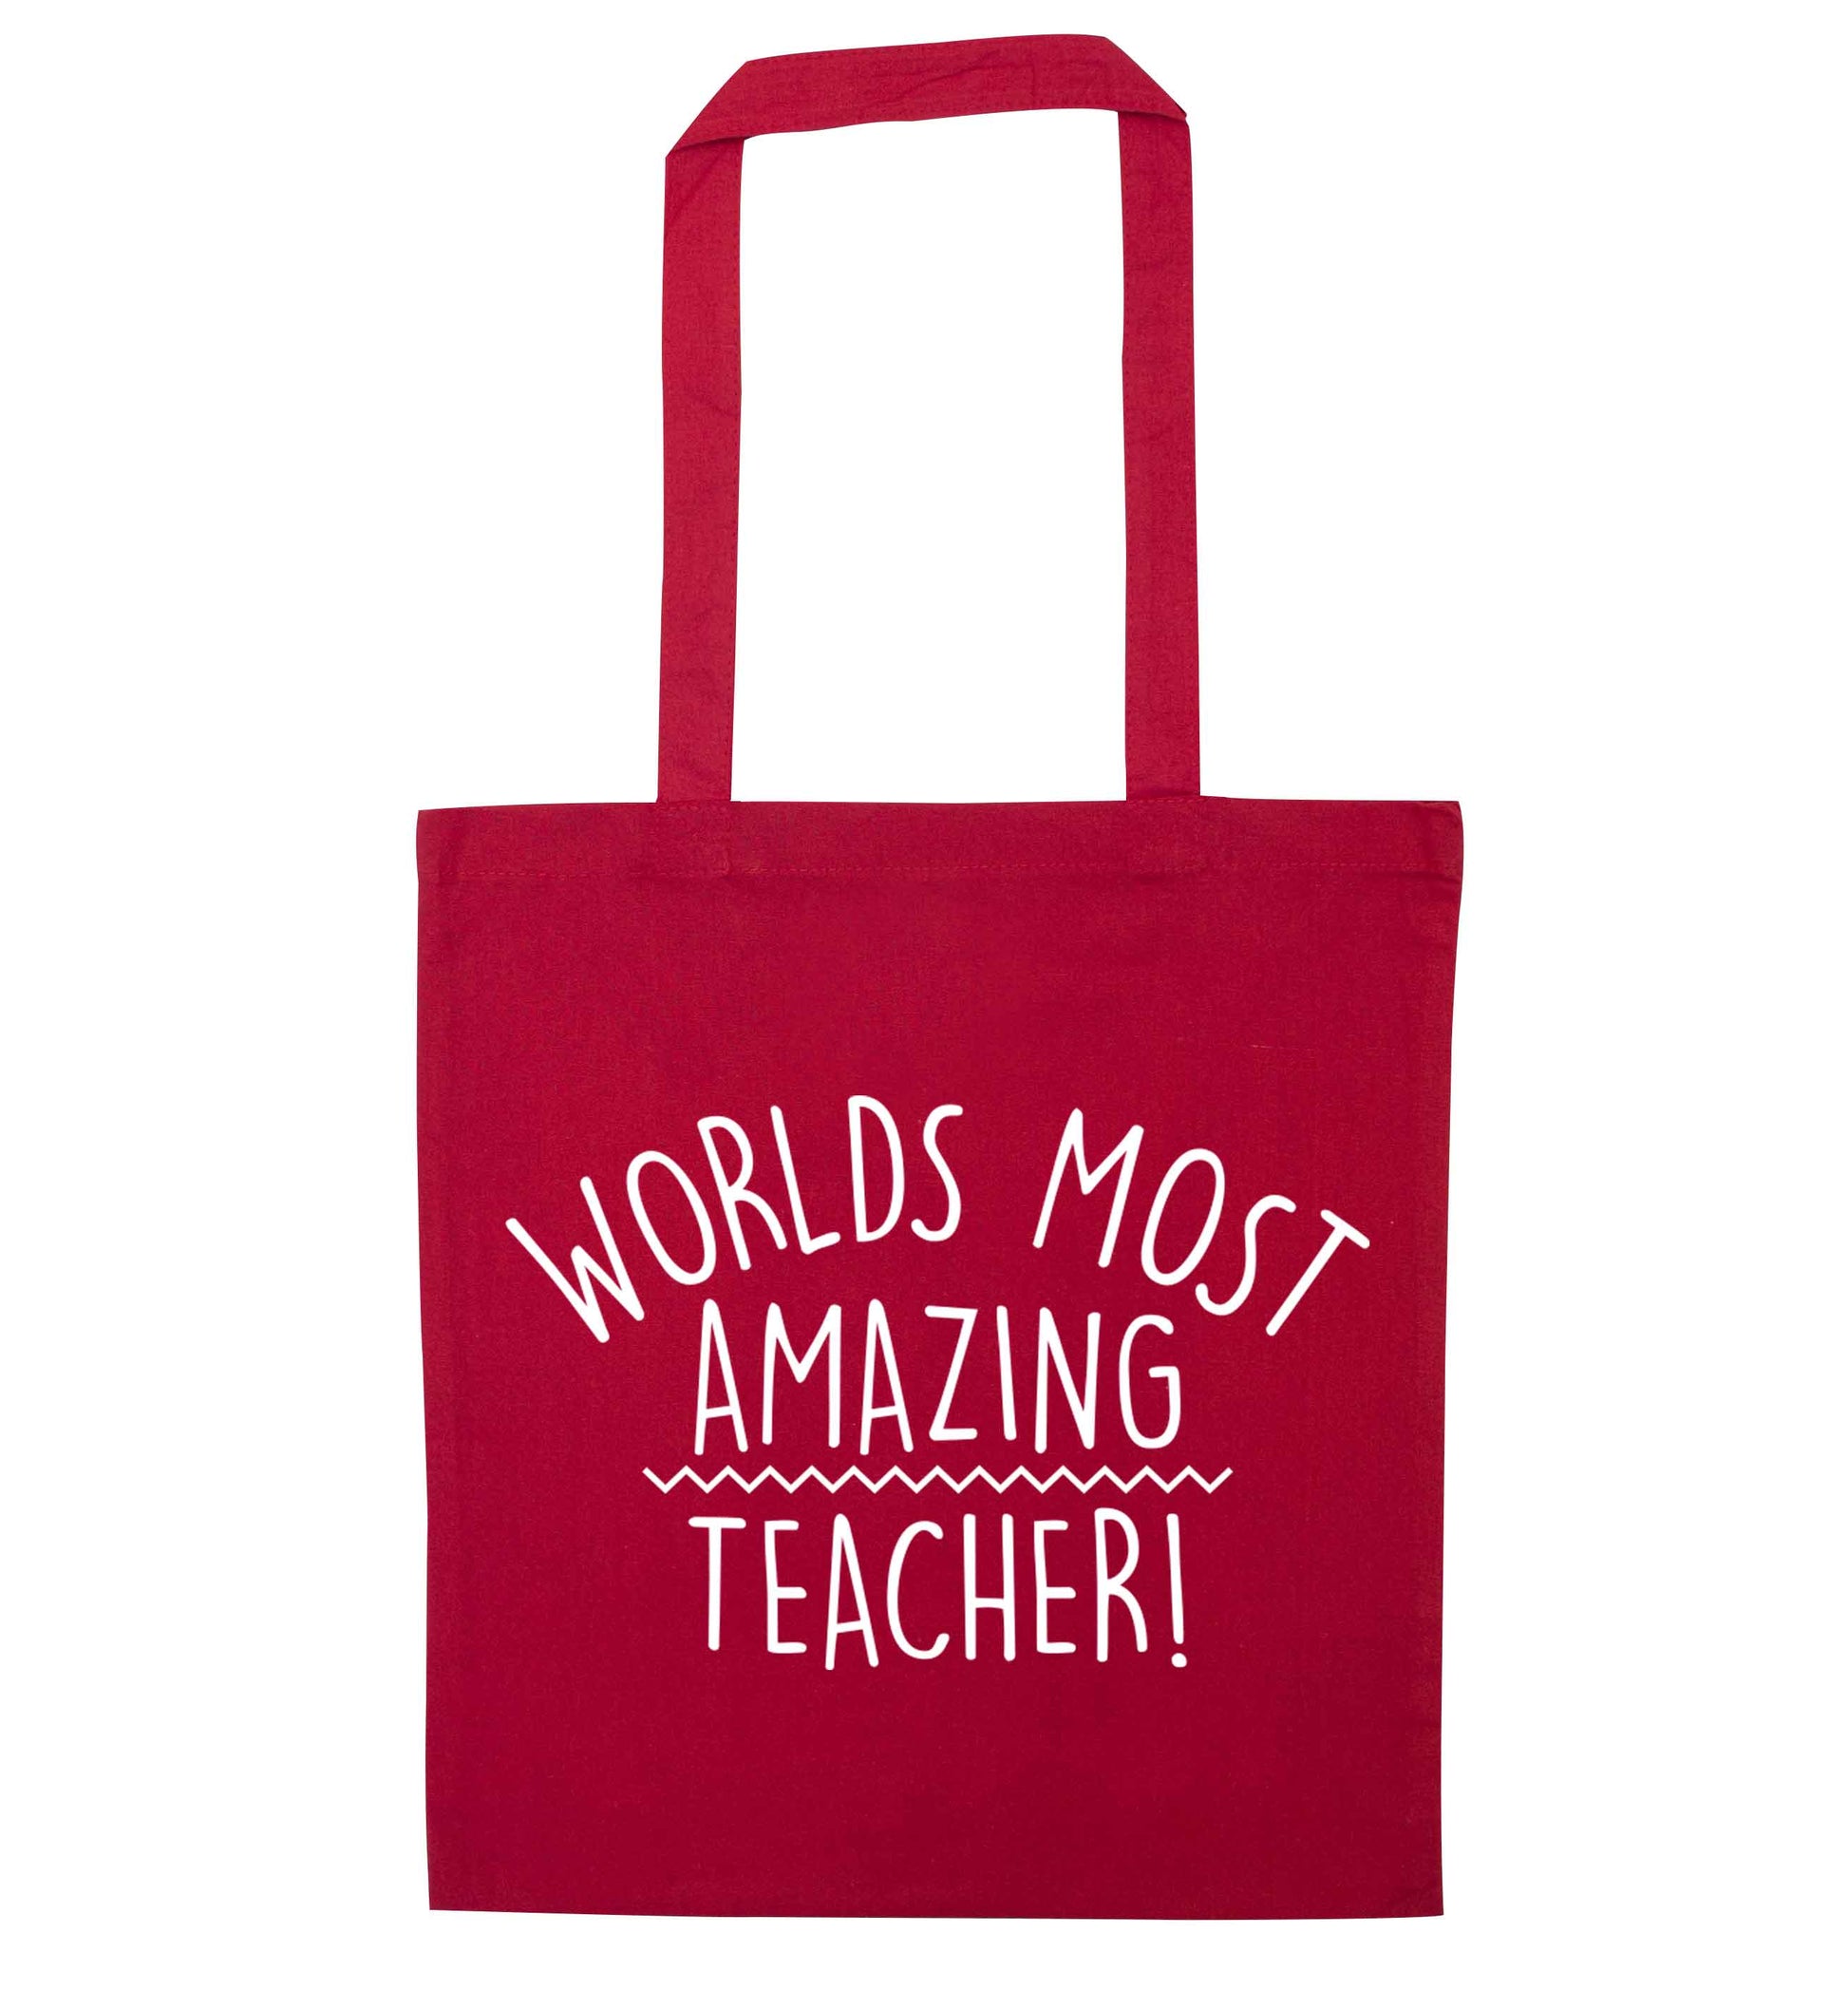 Worlds most amazing teacher red tote bag